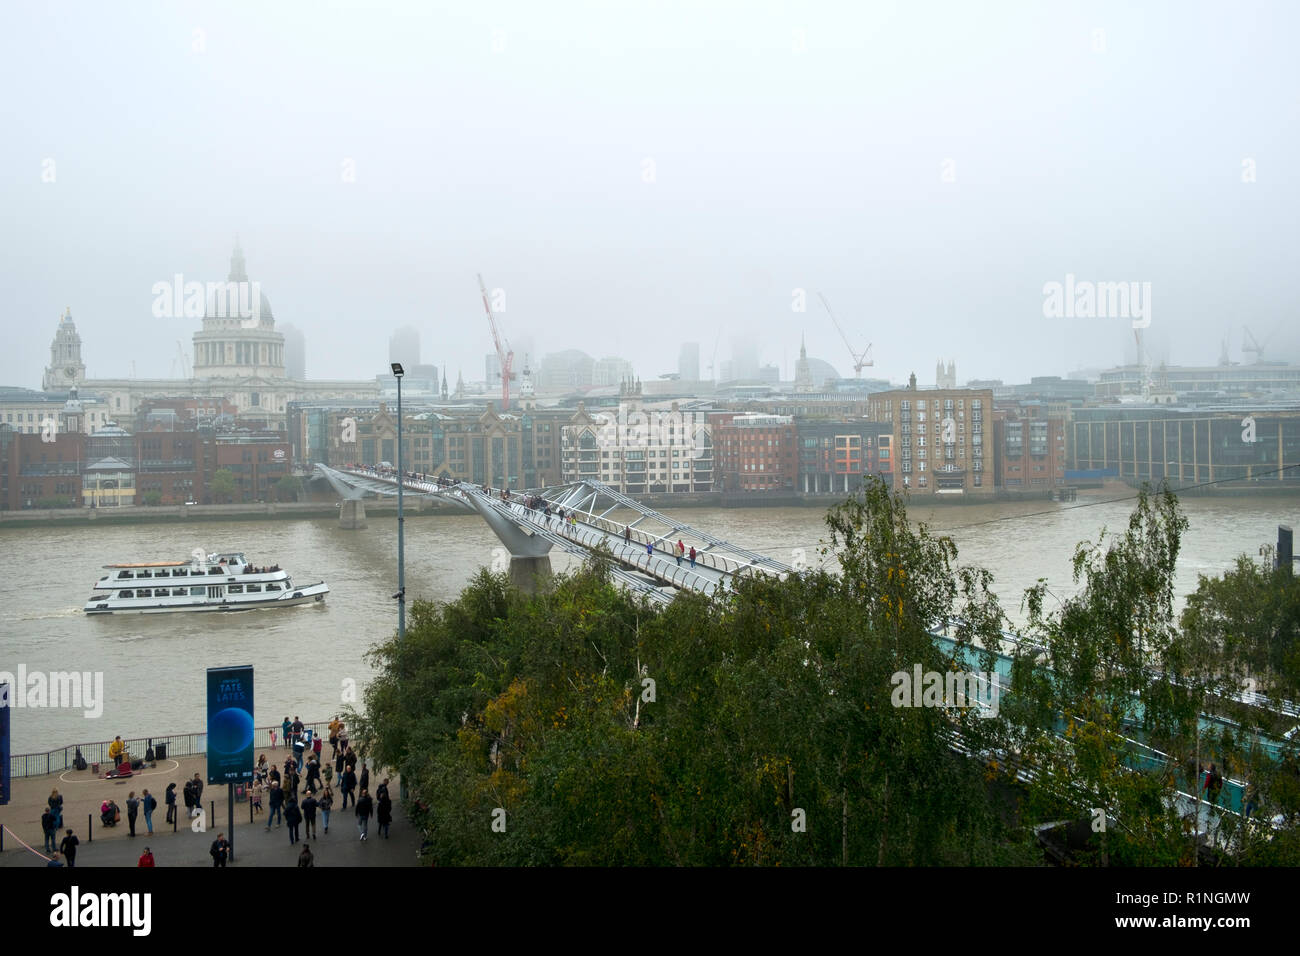 London, UK - 30th October 2016: Looking across the River Thames and the London Millennium Footbridge towards St Pauls Cathedral and The City of London on a foggy autumn day Stock Photo